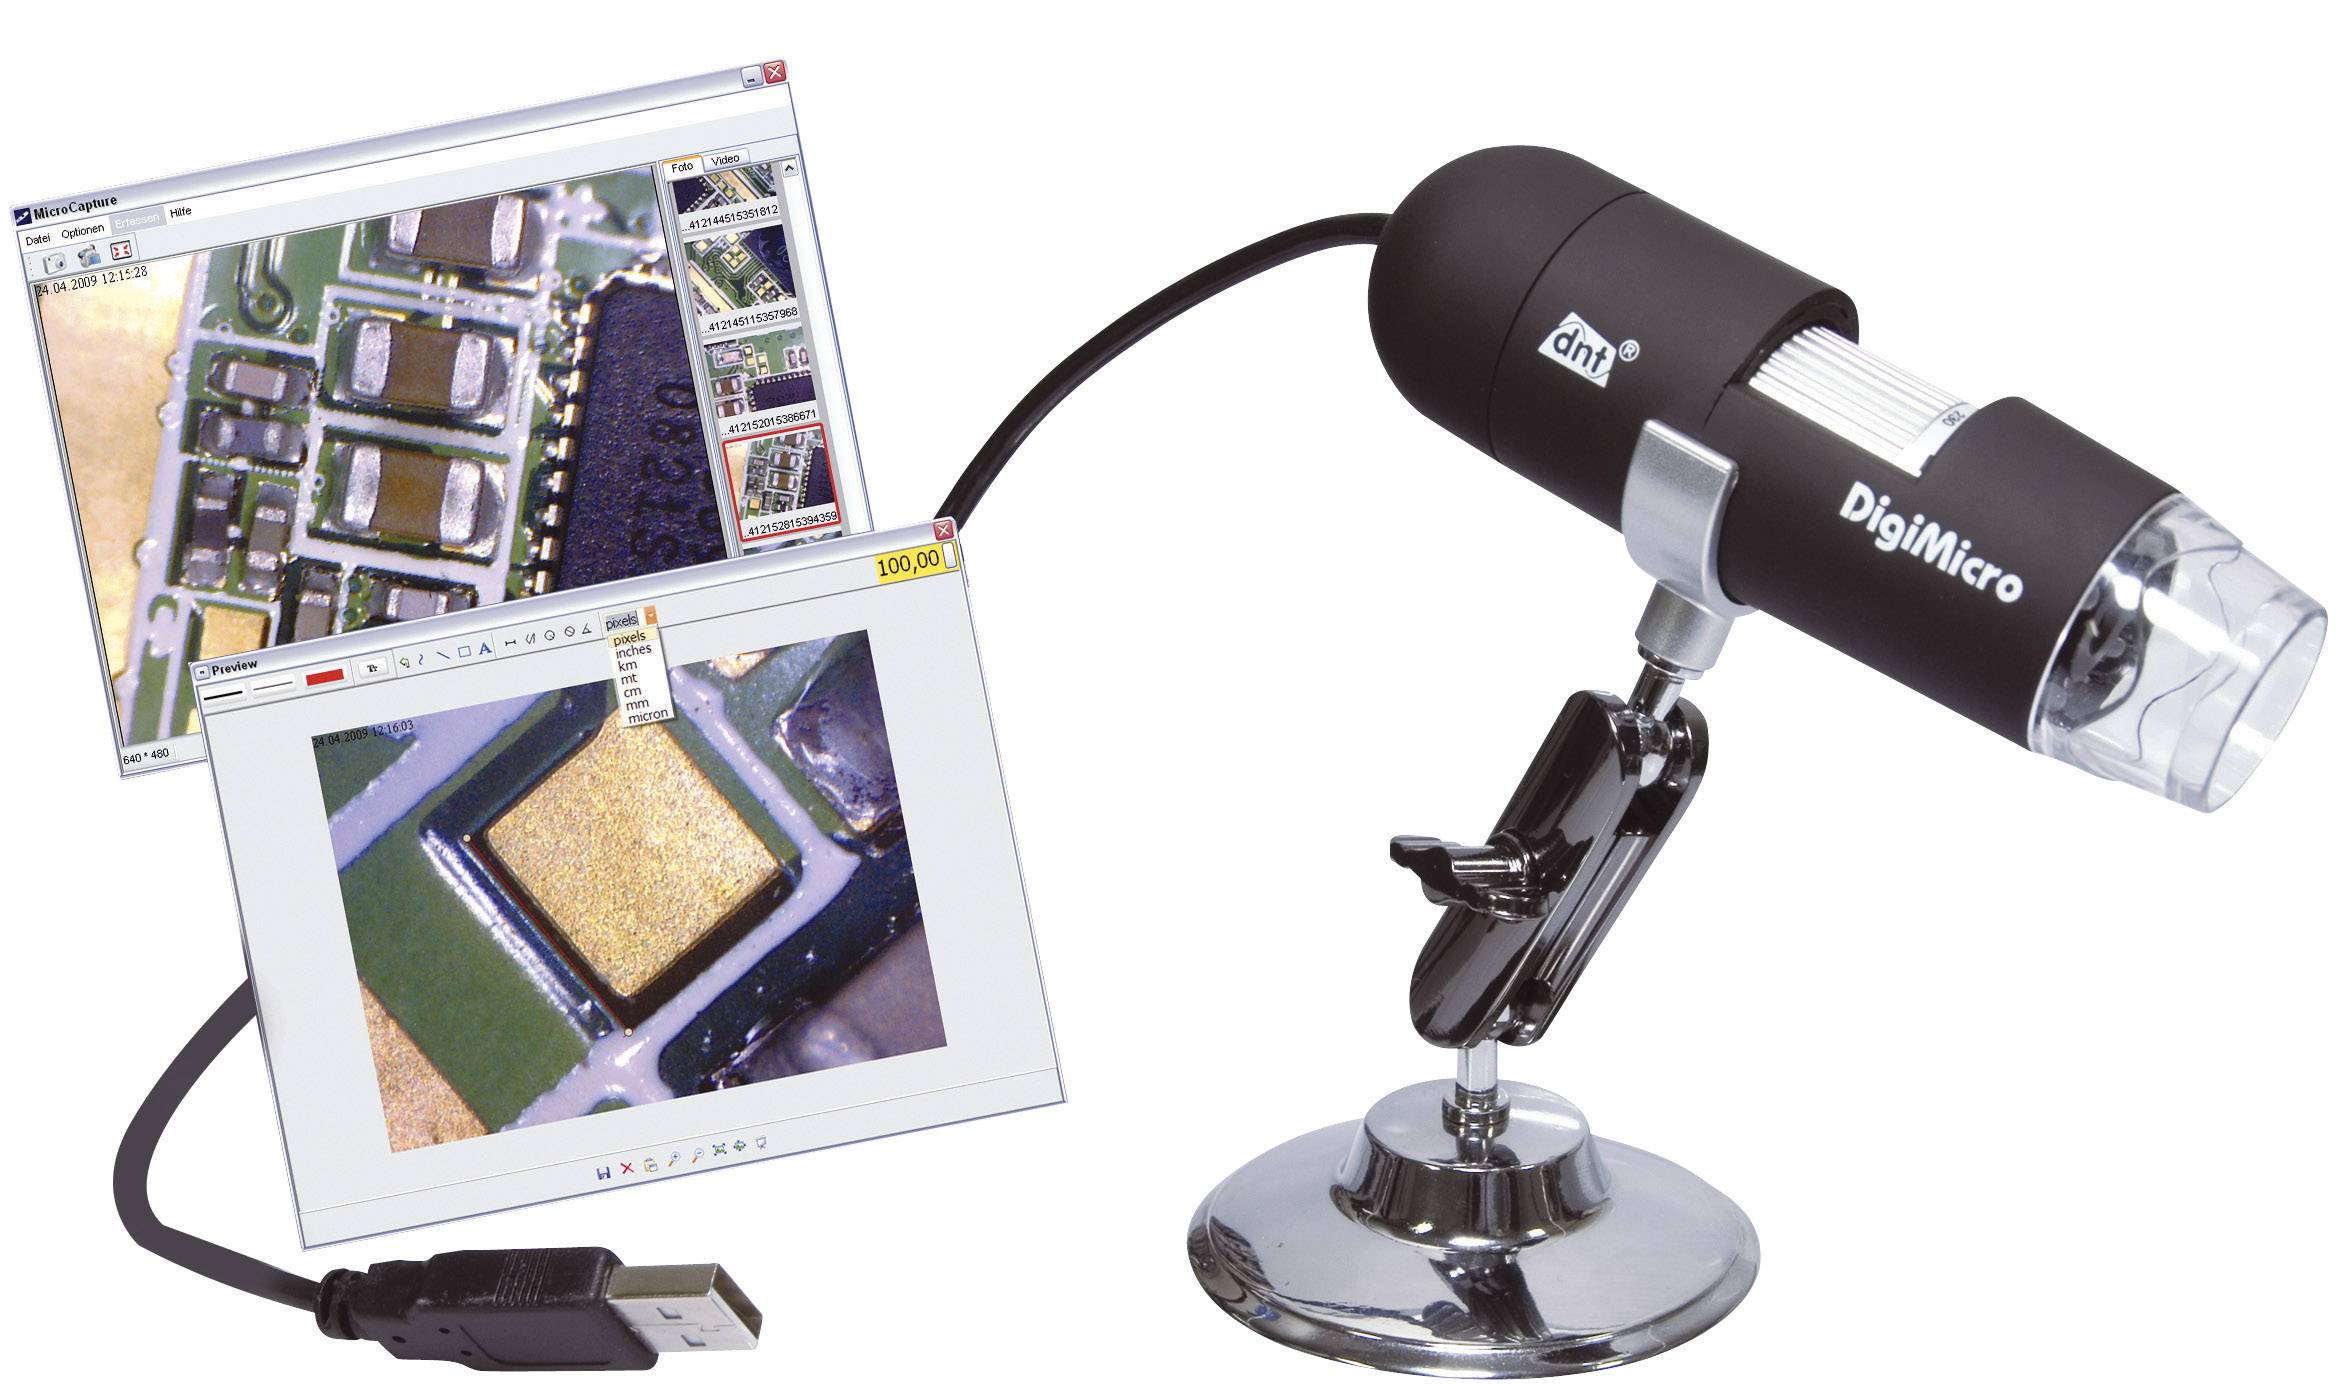 cooling tech microscope software download